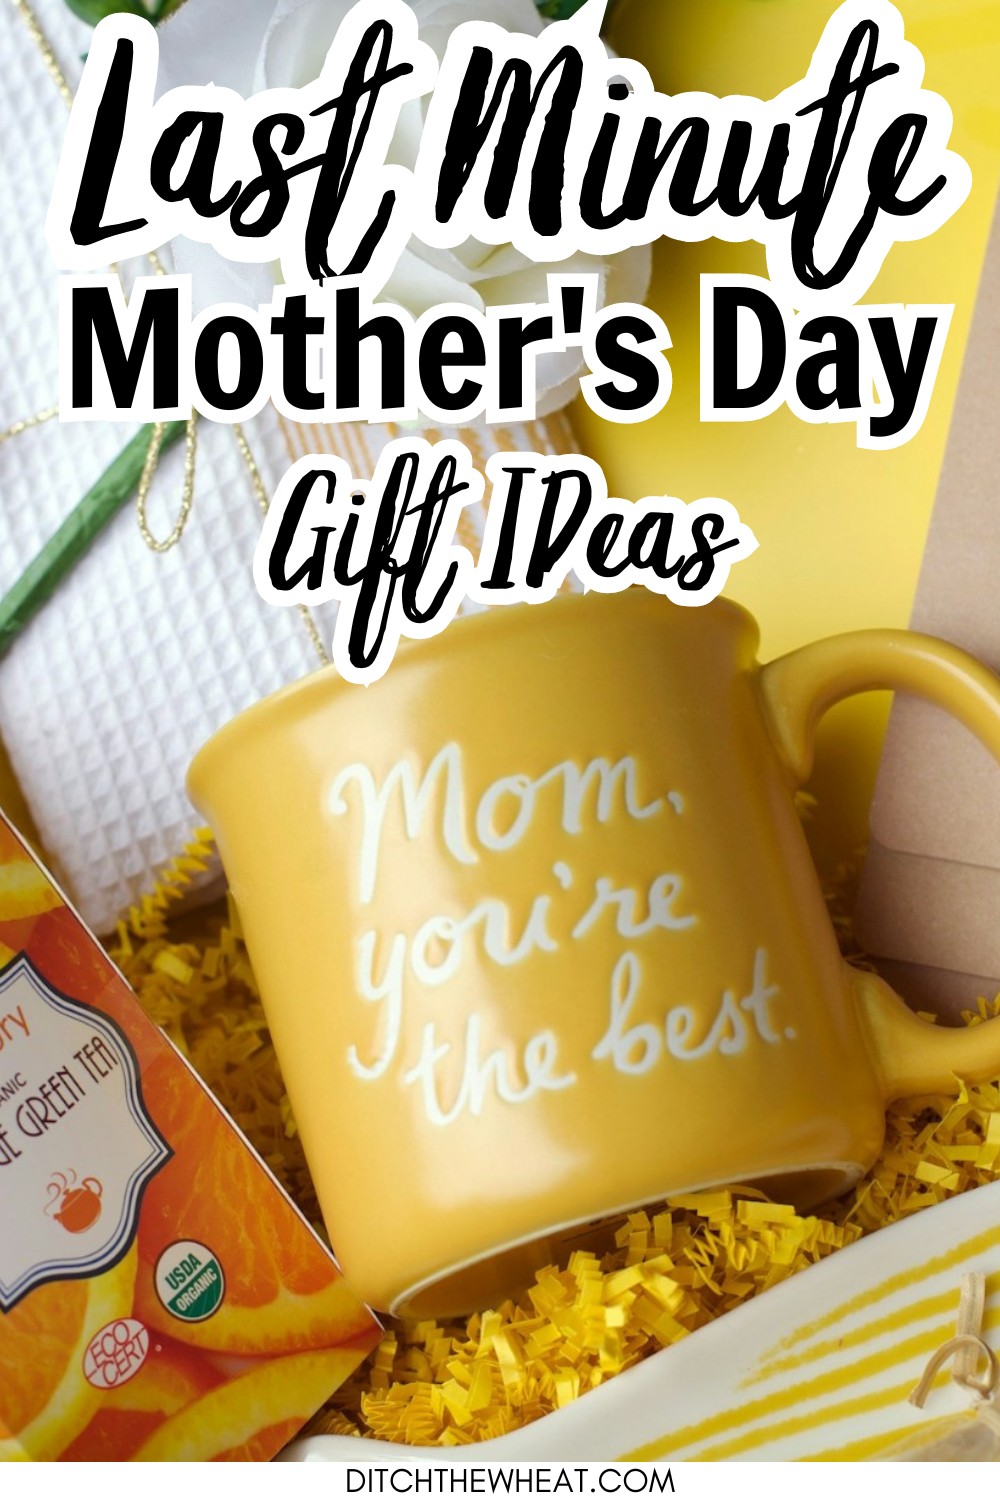 A basket filled with a yellow mug, chocolate, a white rose, and other little gifts.